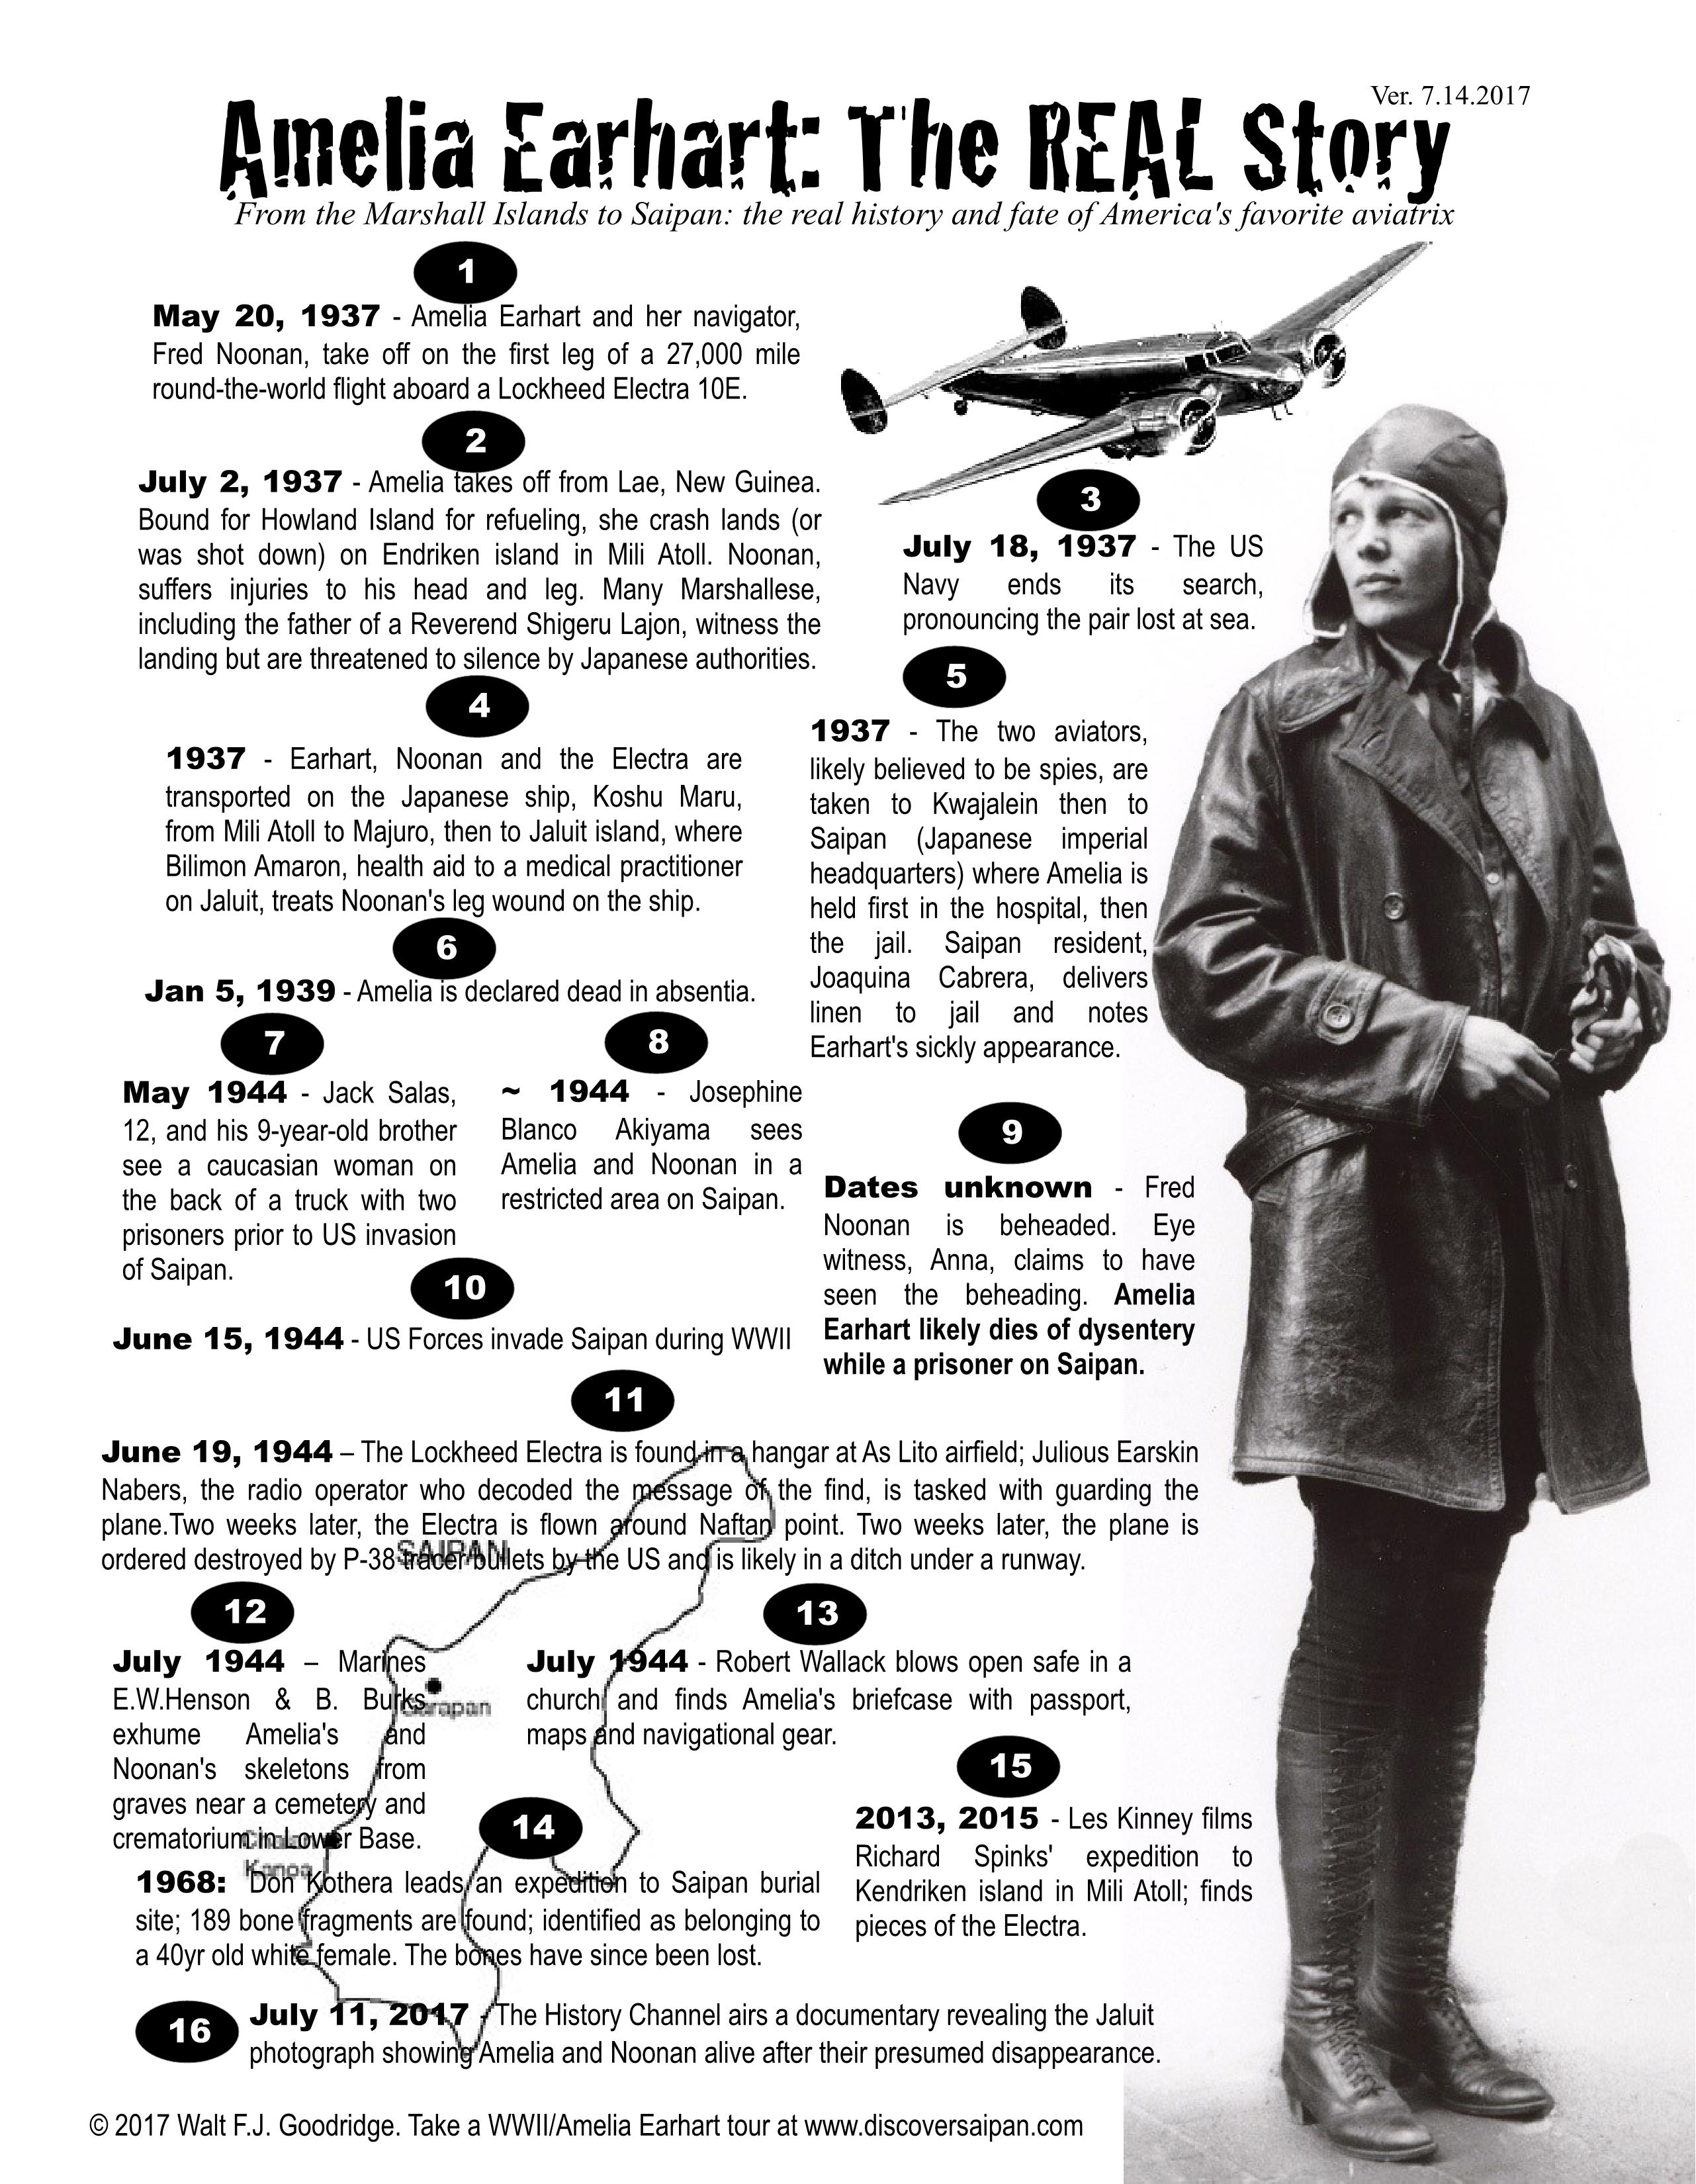 Amelia Earhart Timeline of events AFTER her presumed disappearance